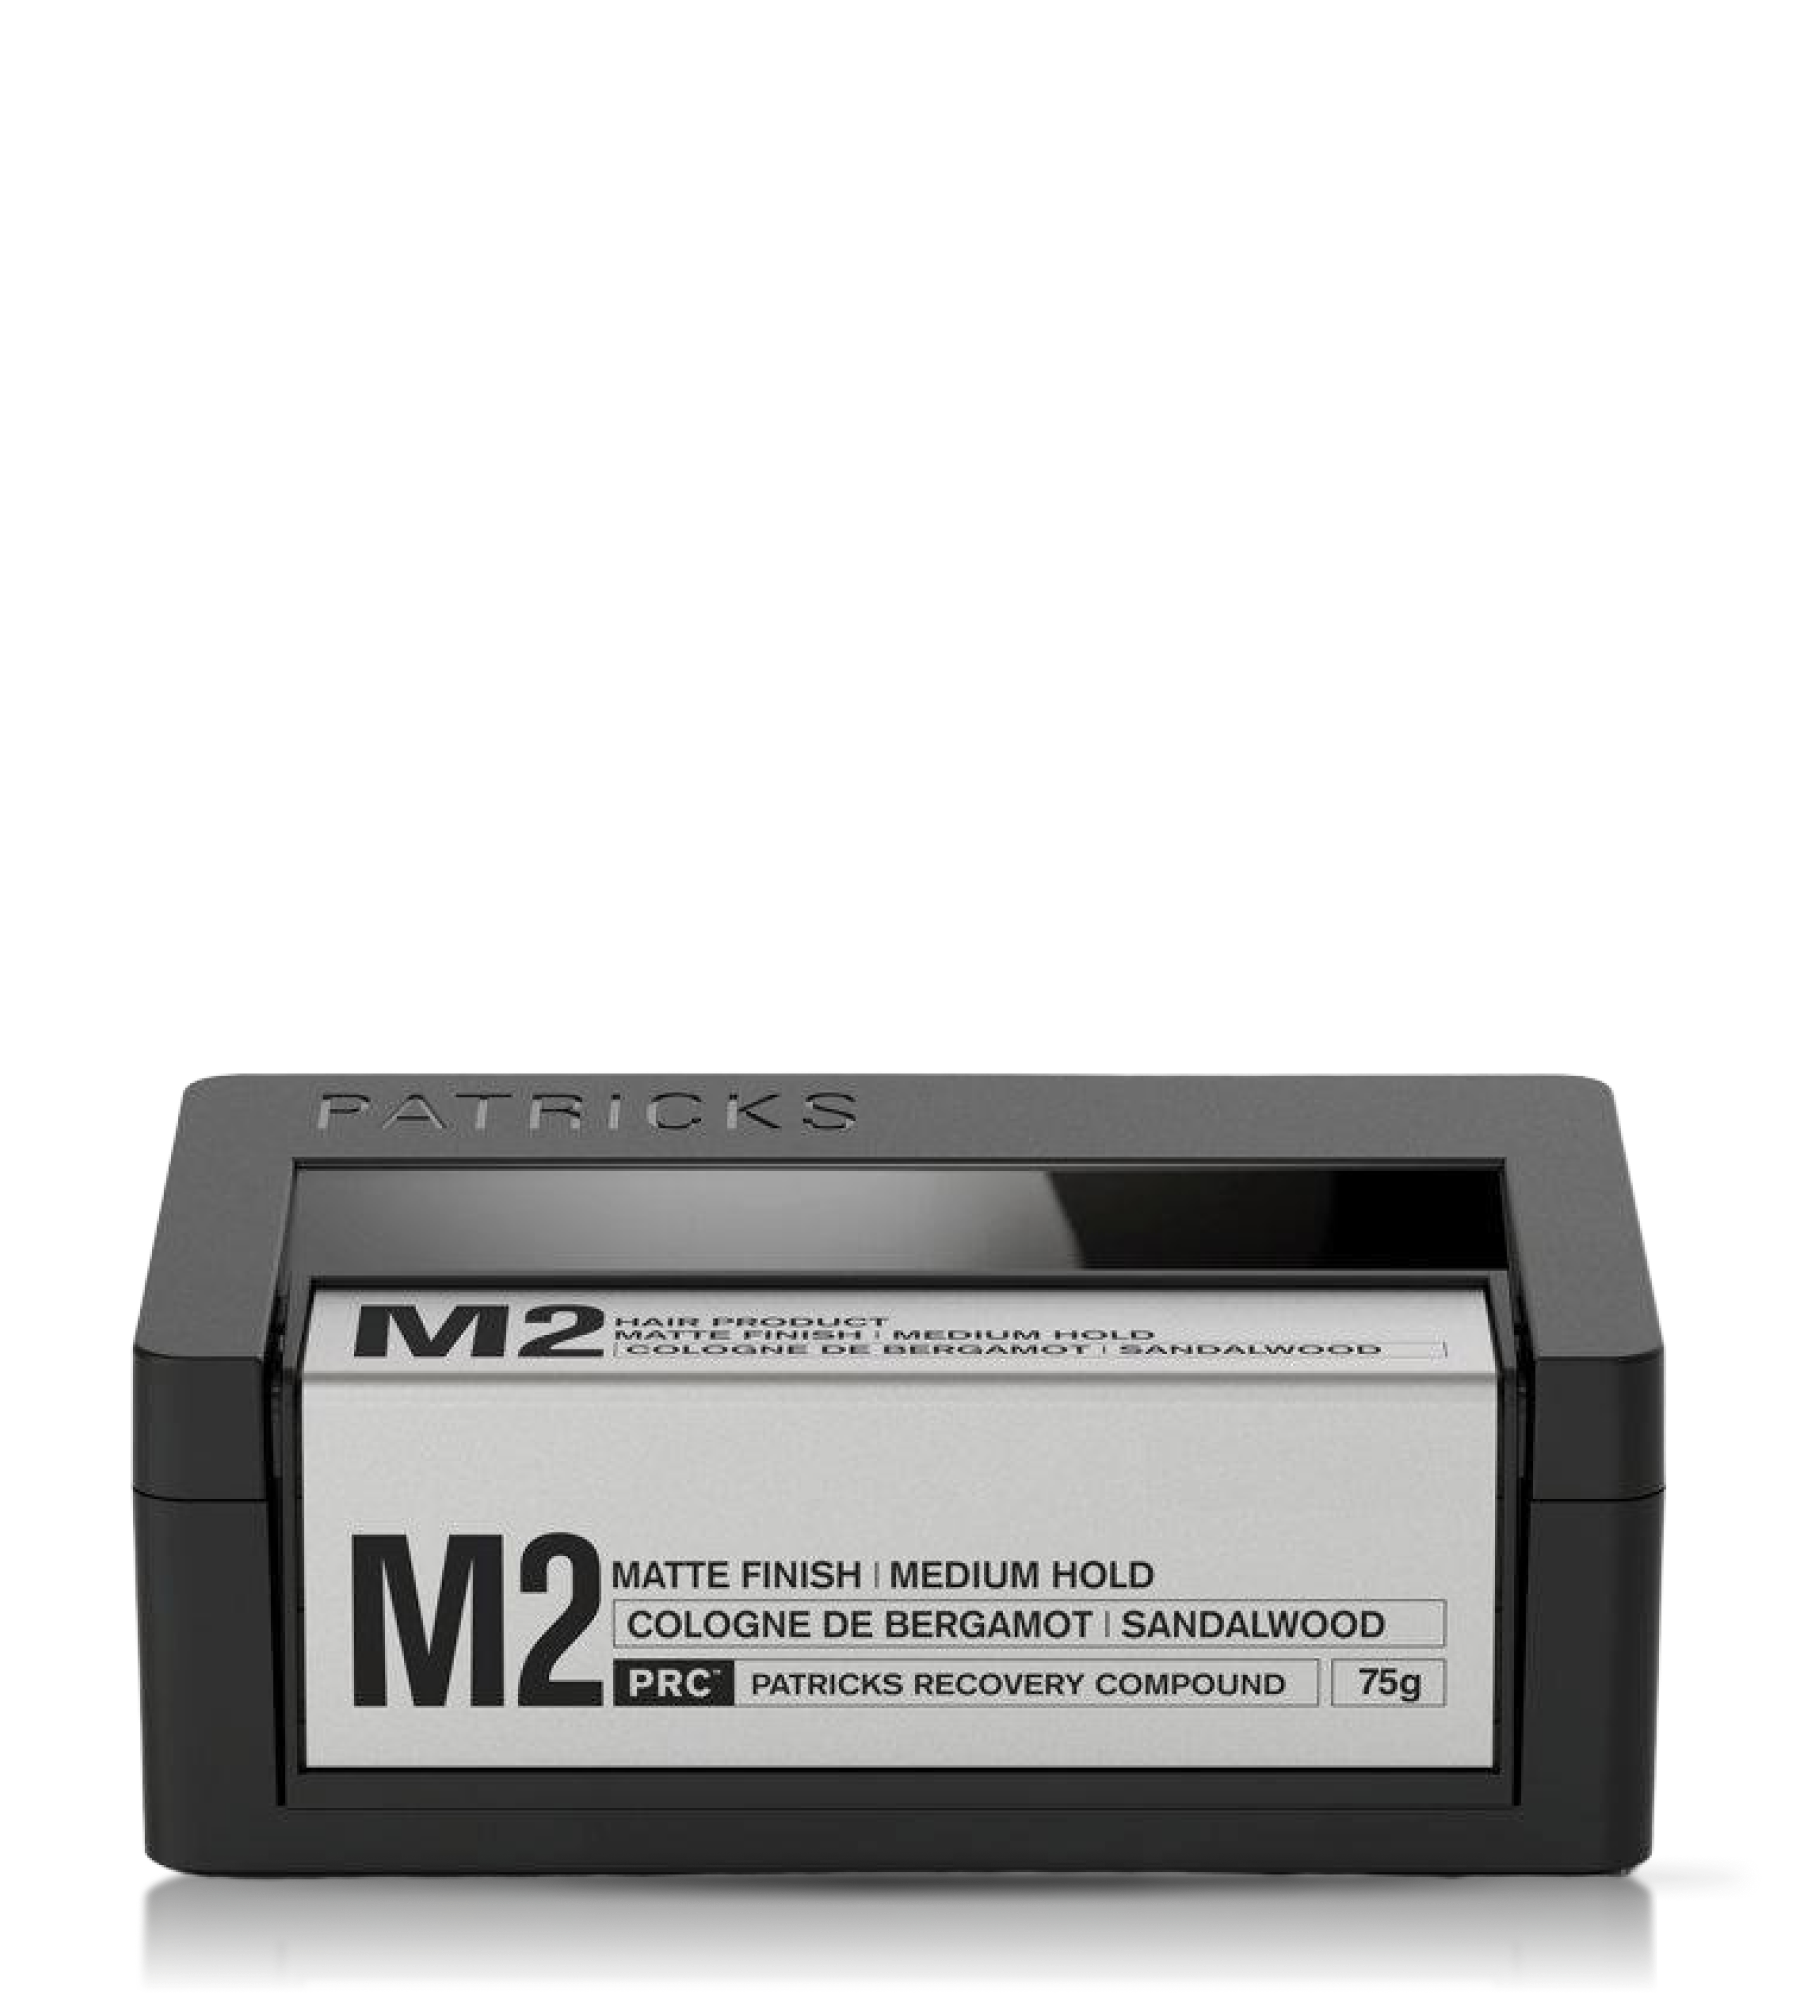 M2 | Matte Medium Hold - Patrick's Products | Hair Styling | Buy Perfume Online